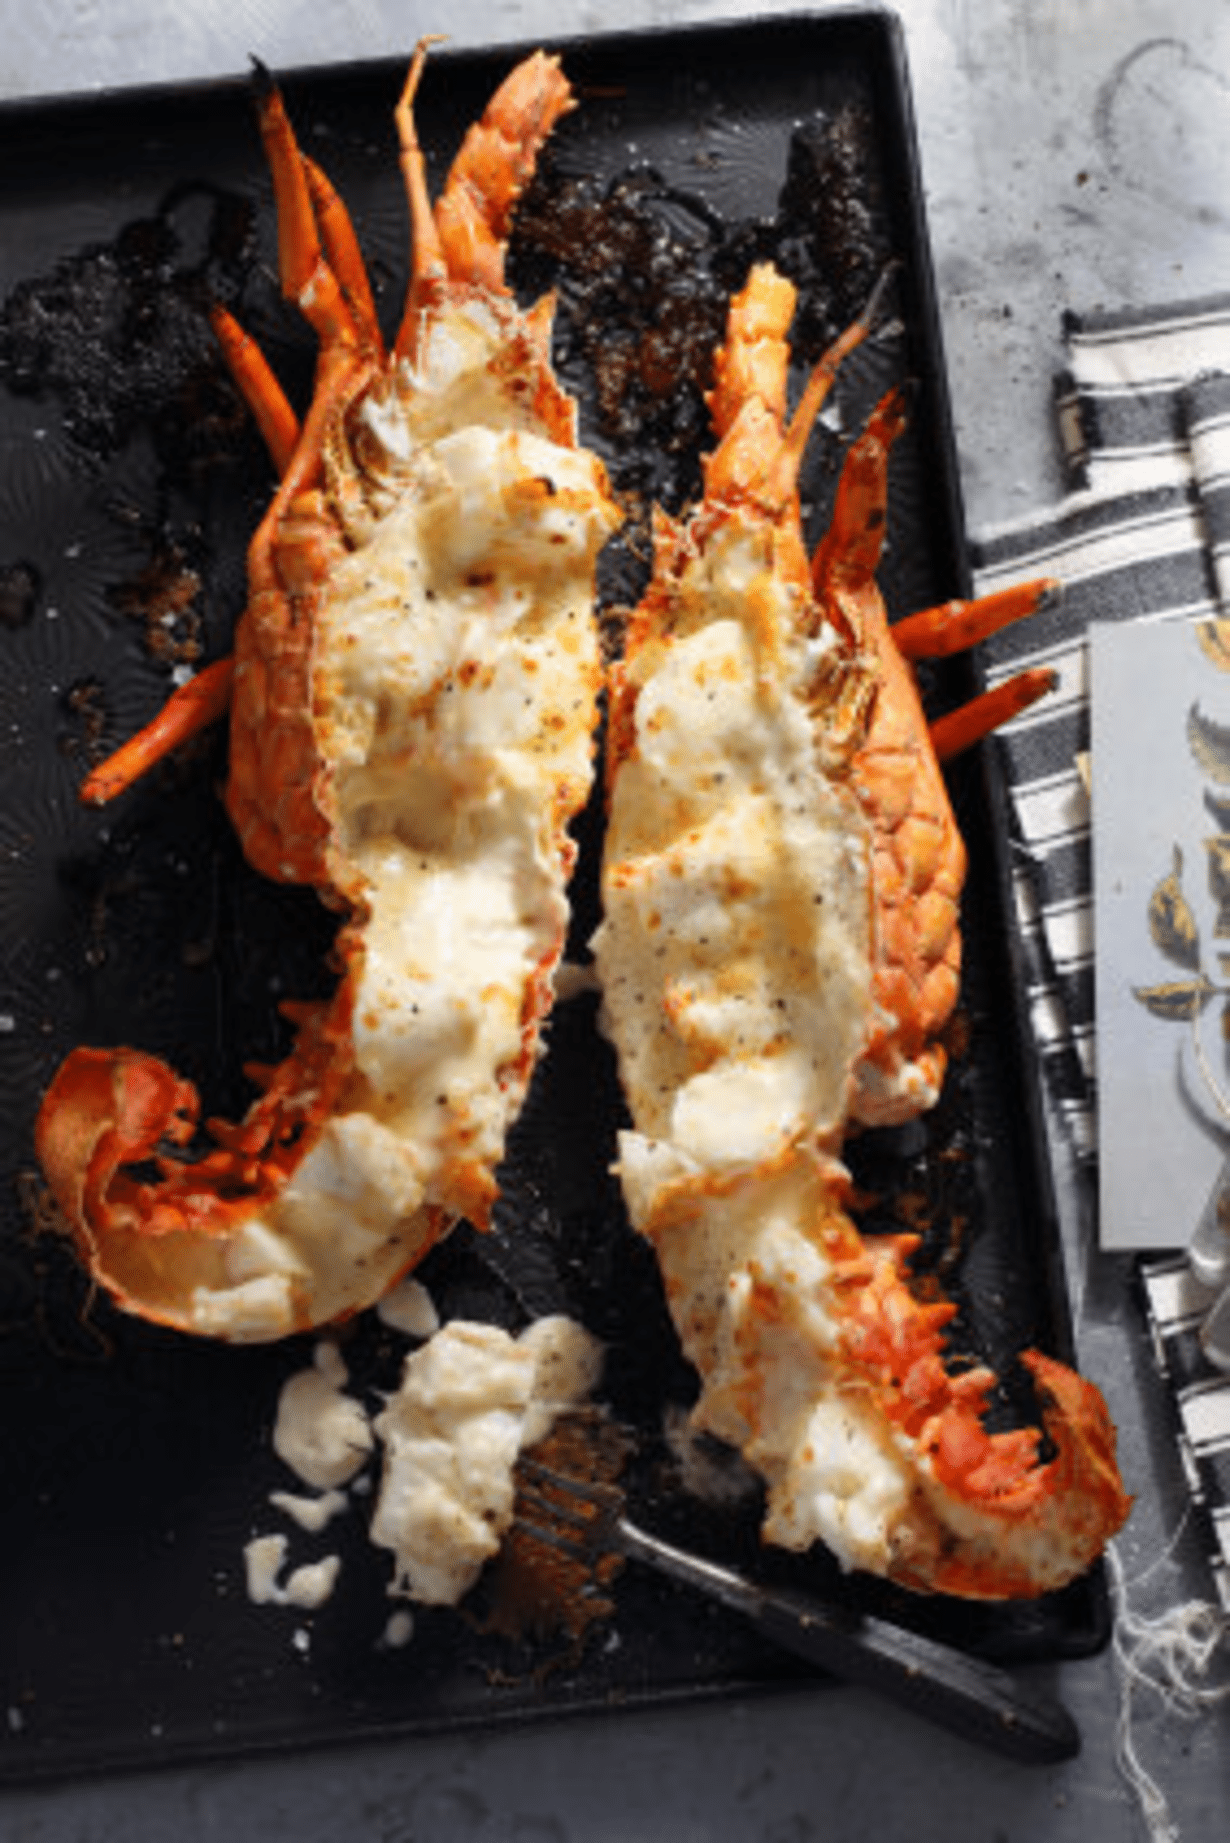 Lobster Thermidor: The Uncool King of Luxury Dishes